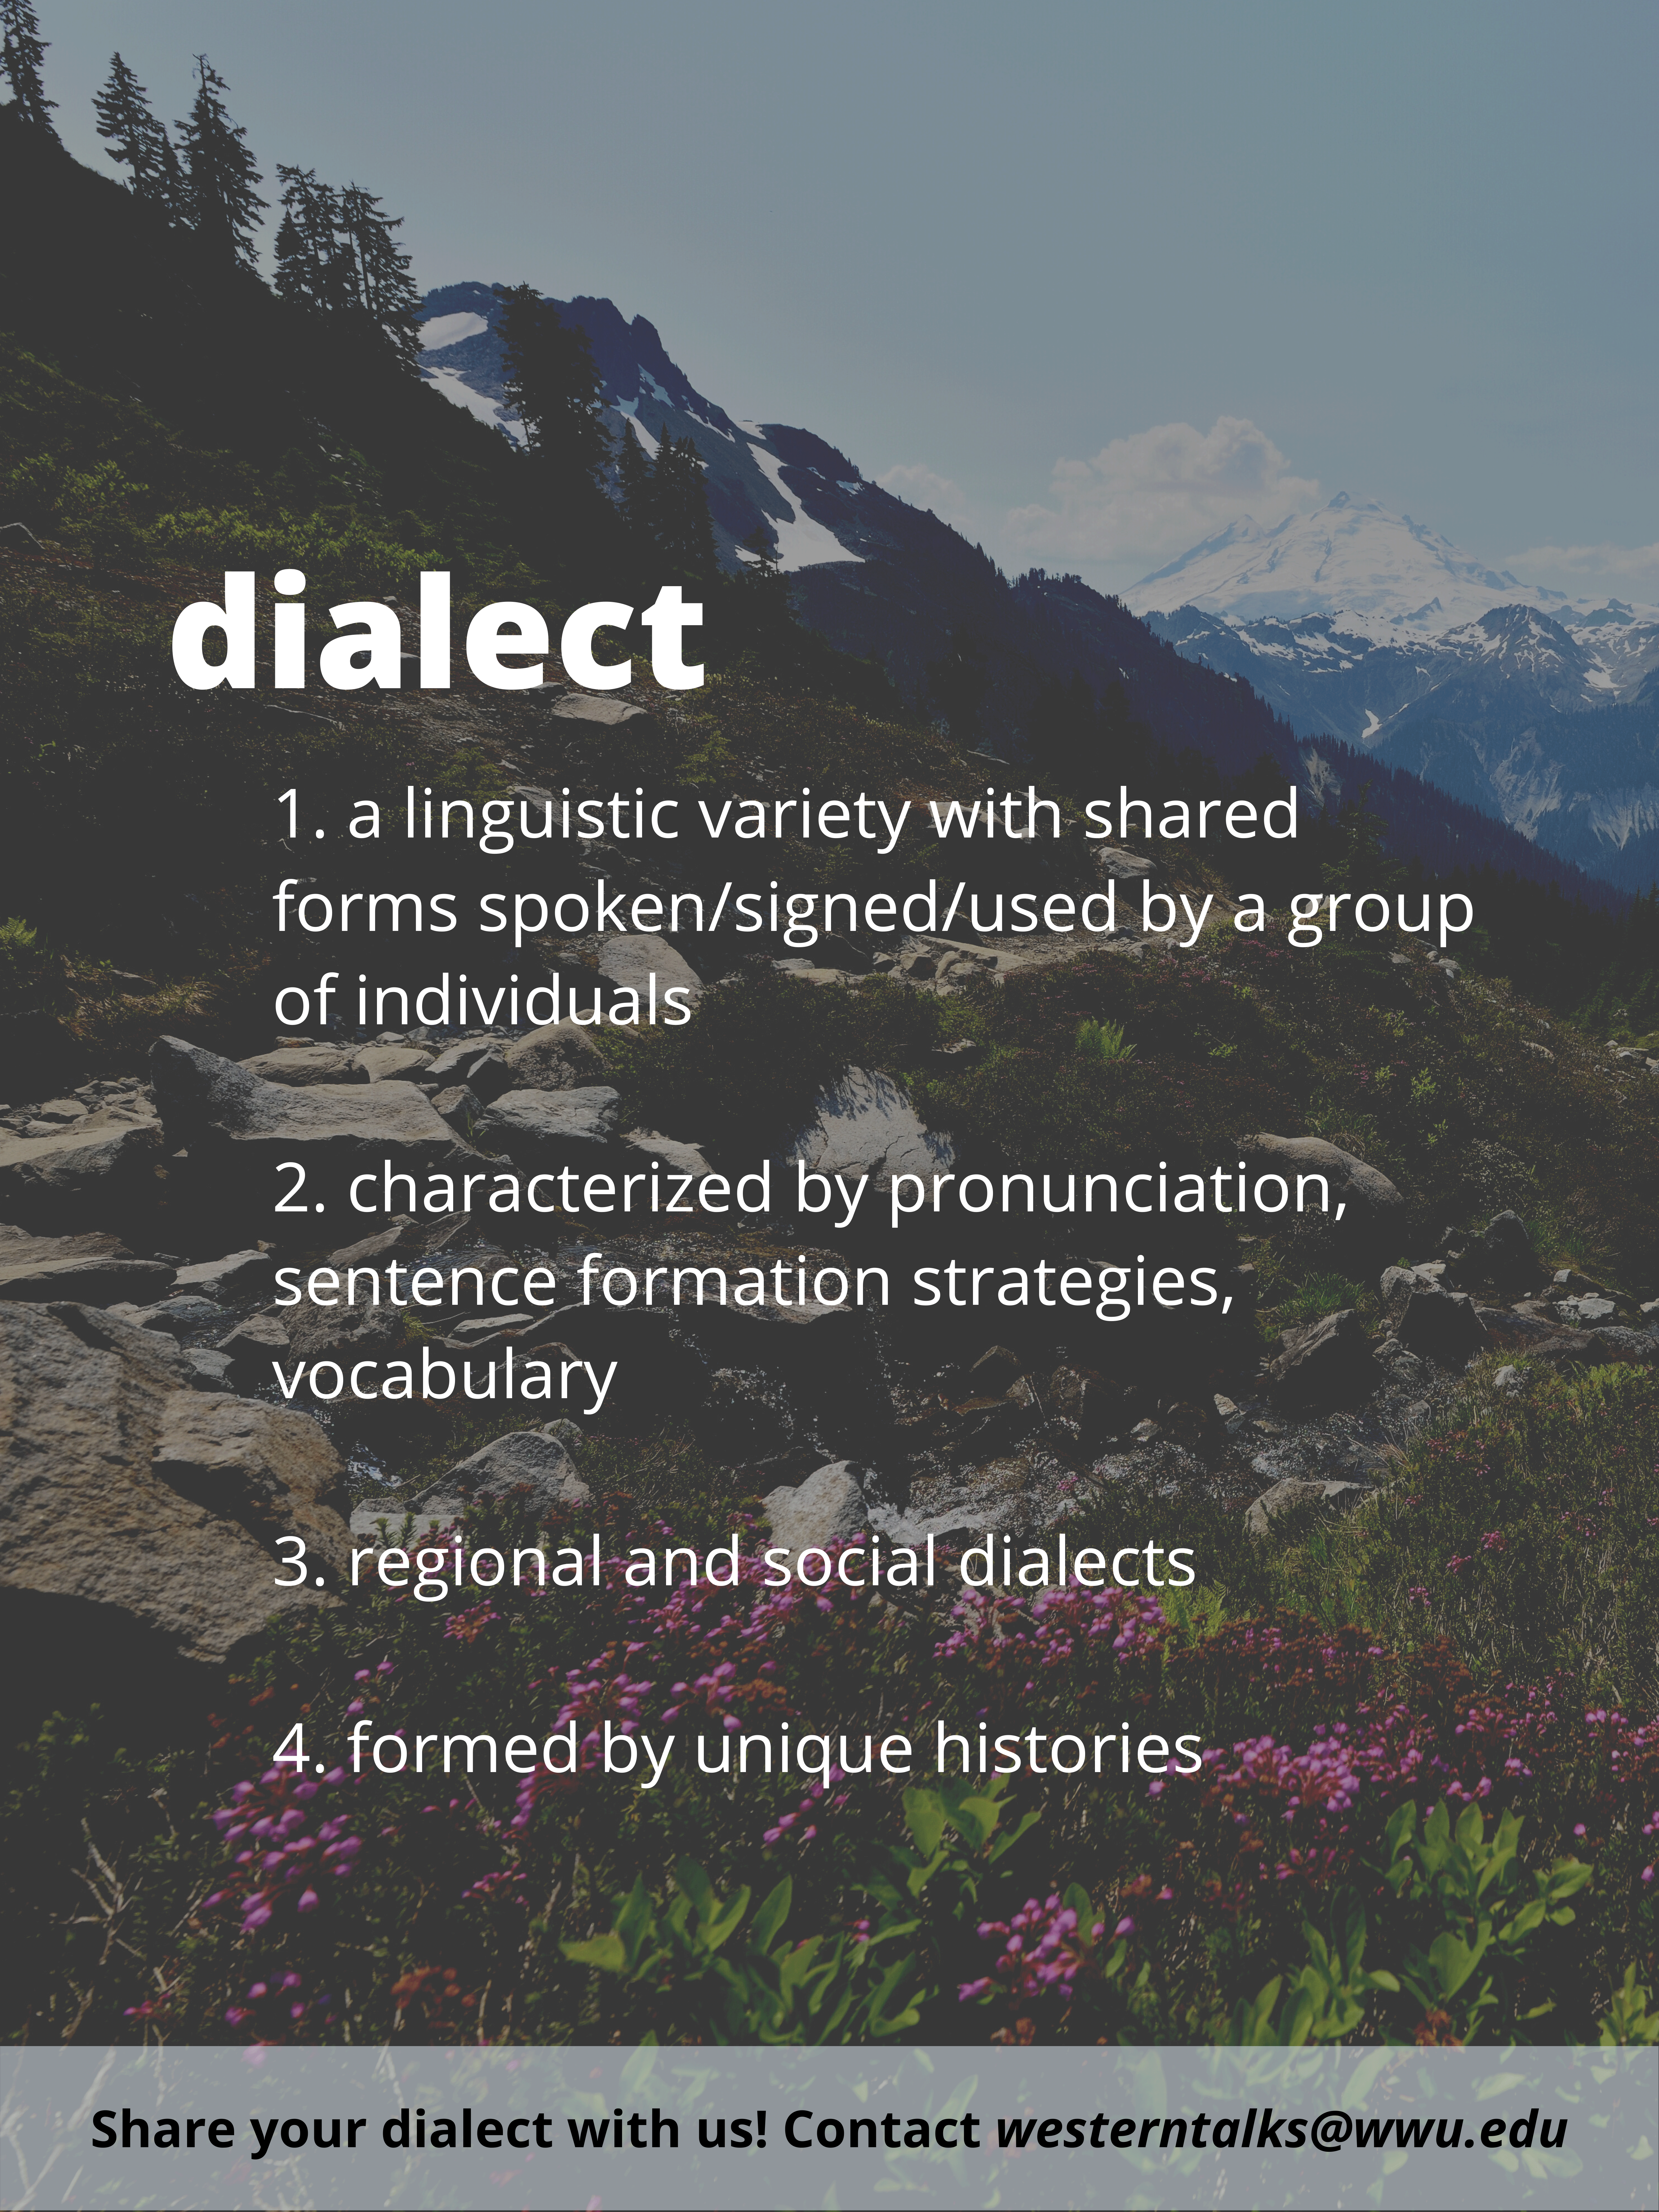 Linguistics Poster. Definition of dialect. See page for full description.